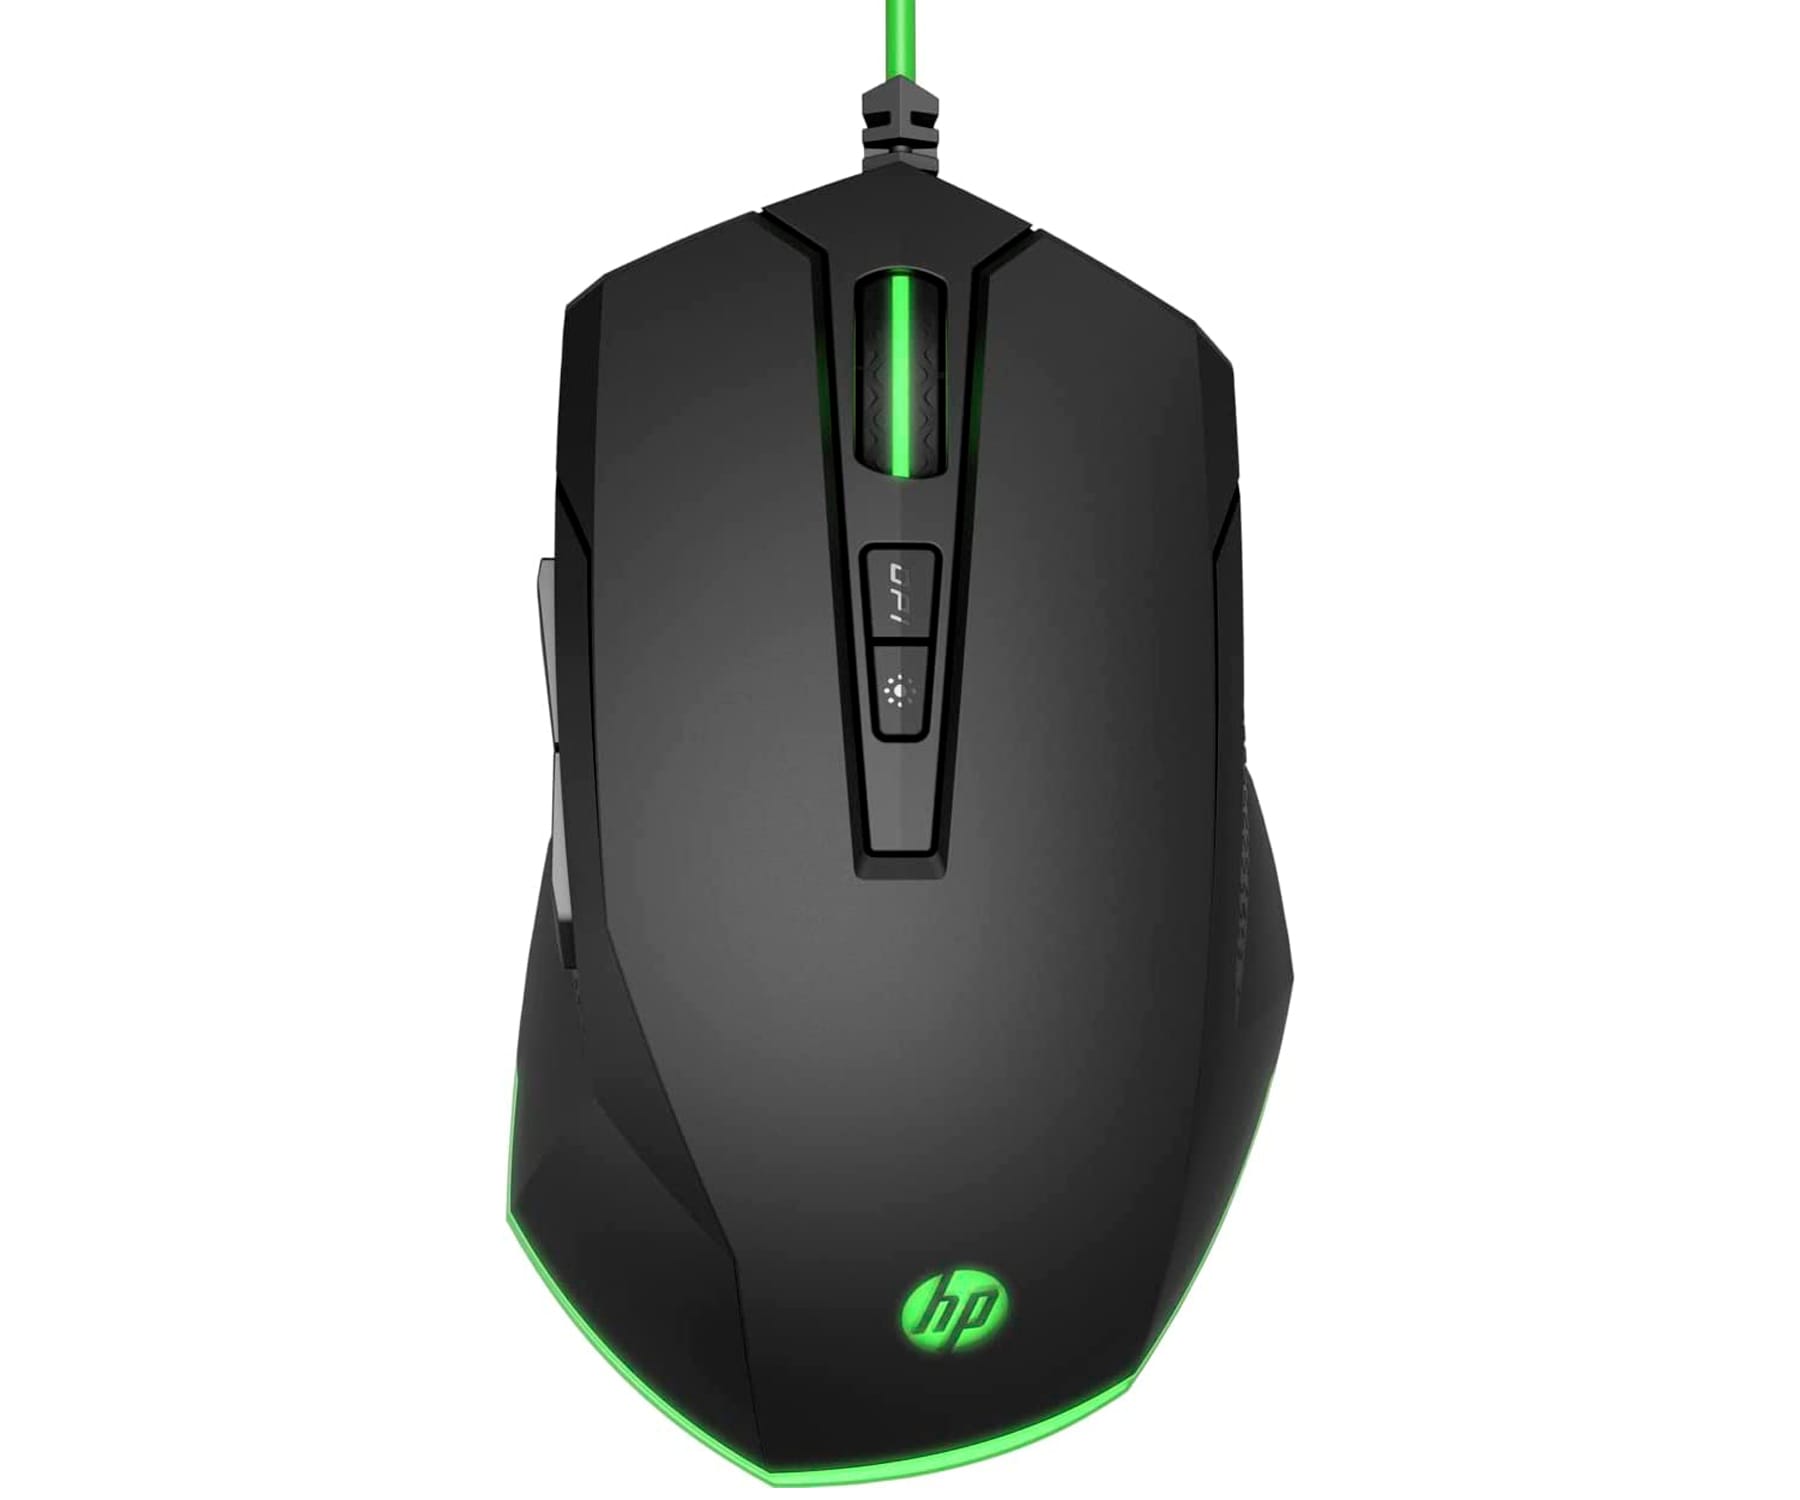 HP PAVILION GAMING MOUSE 200 / RATÓN GAMING CON CABLE USB